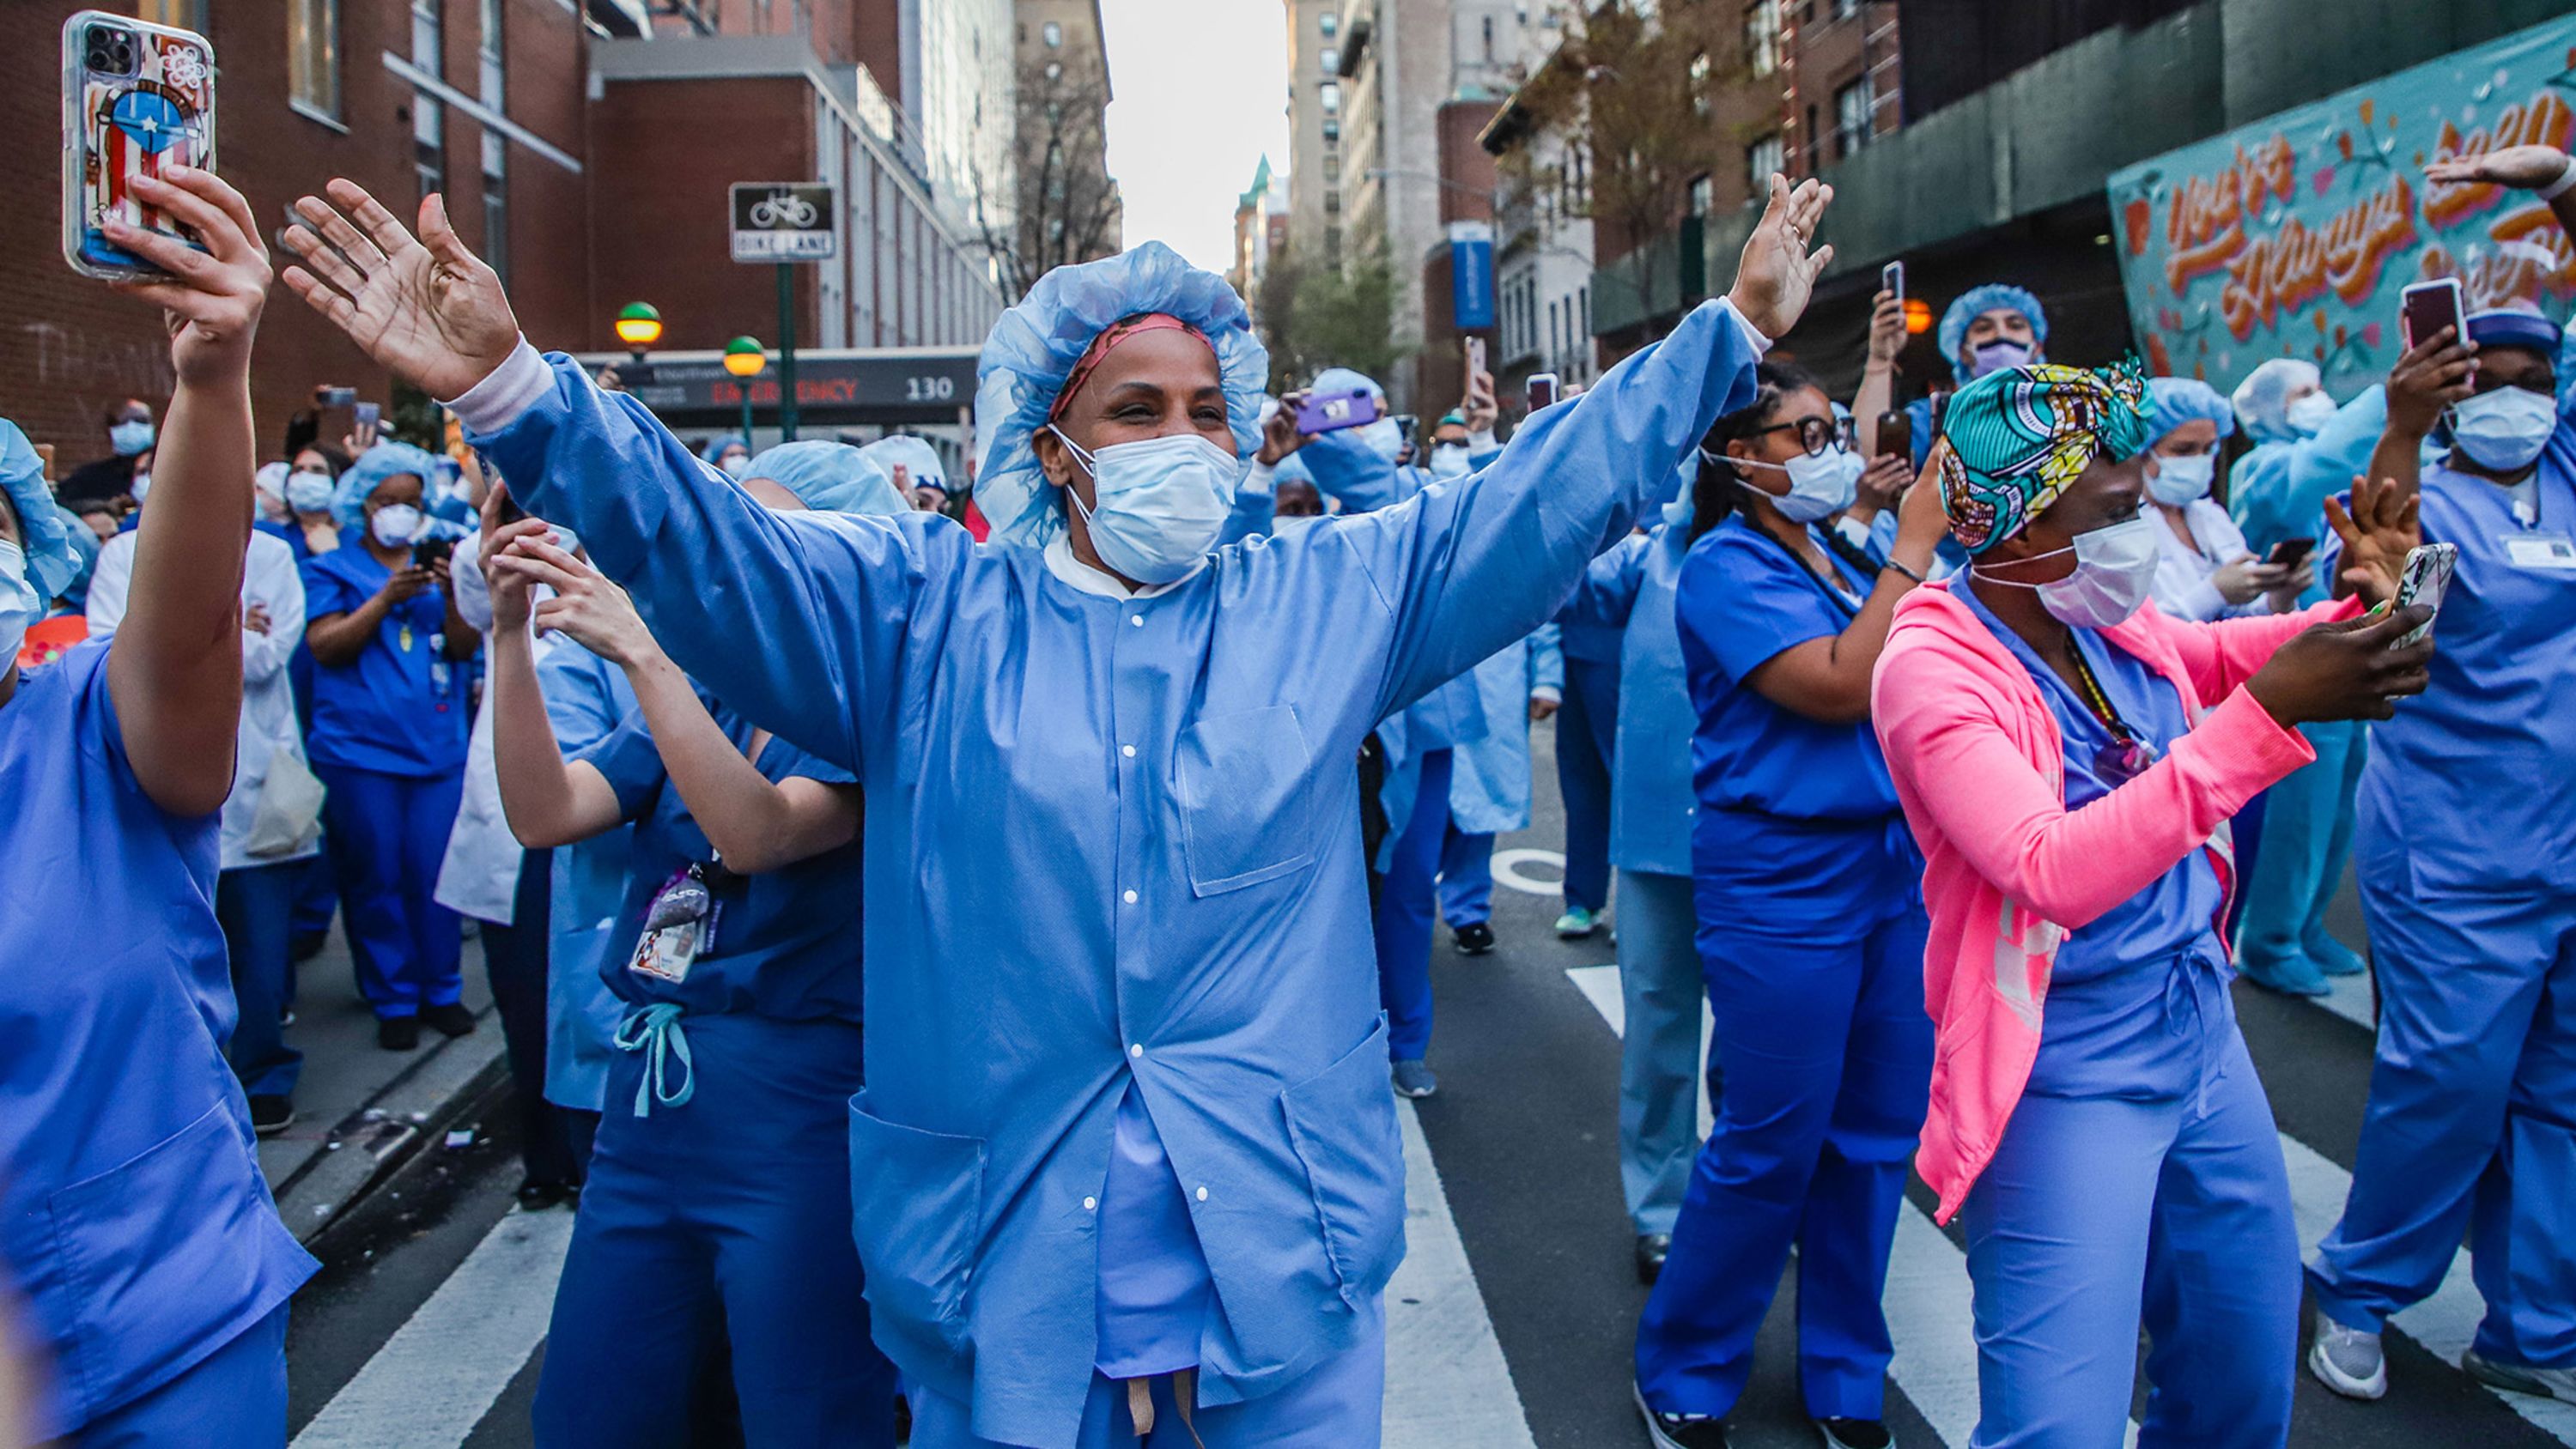 Health-care workers wave back to people applauding them in New York City on April 15.